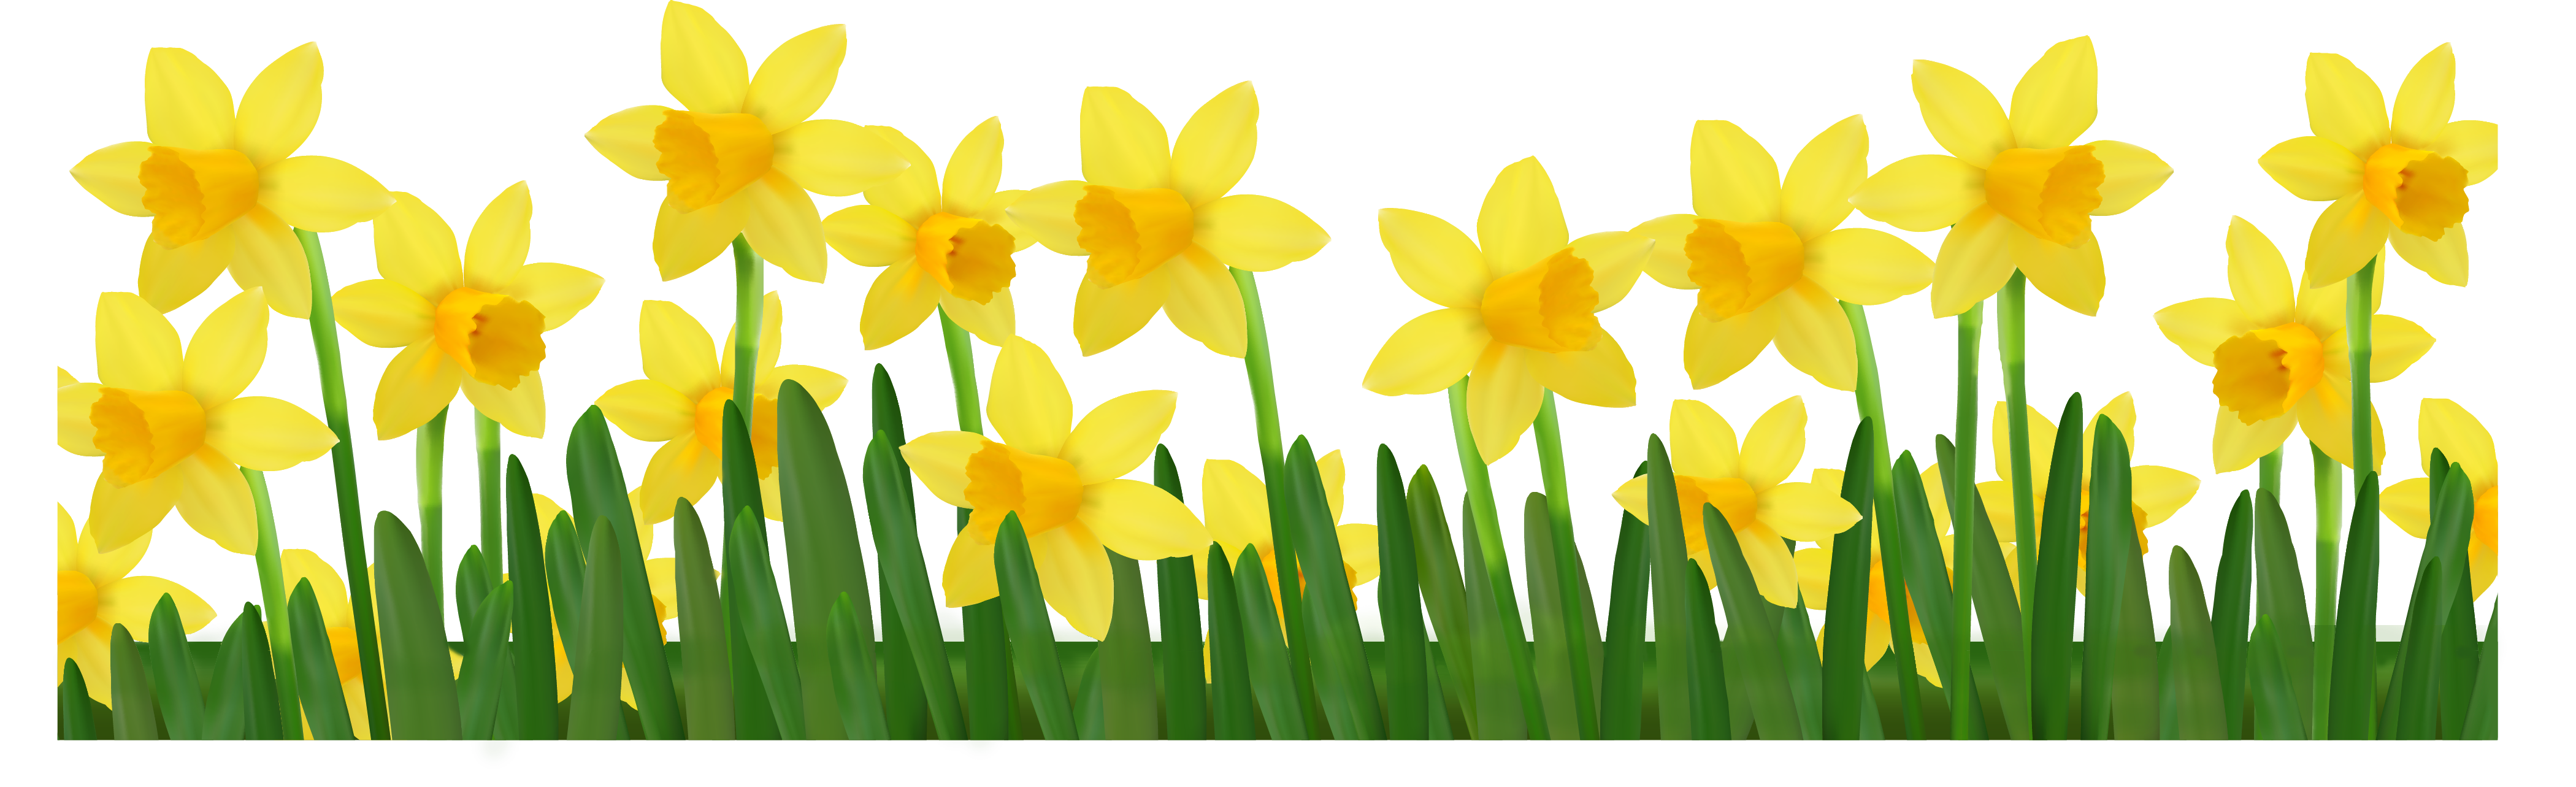 Free Printable Pictures Of Daffodils - Free Templates Printable